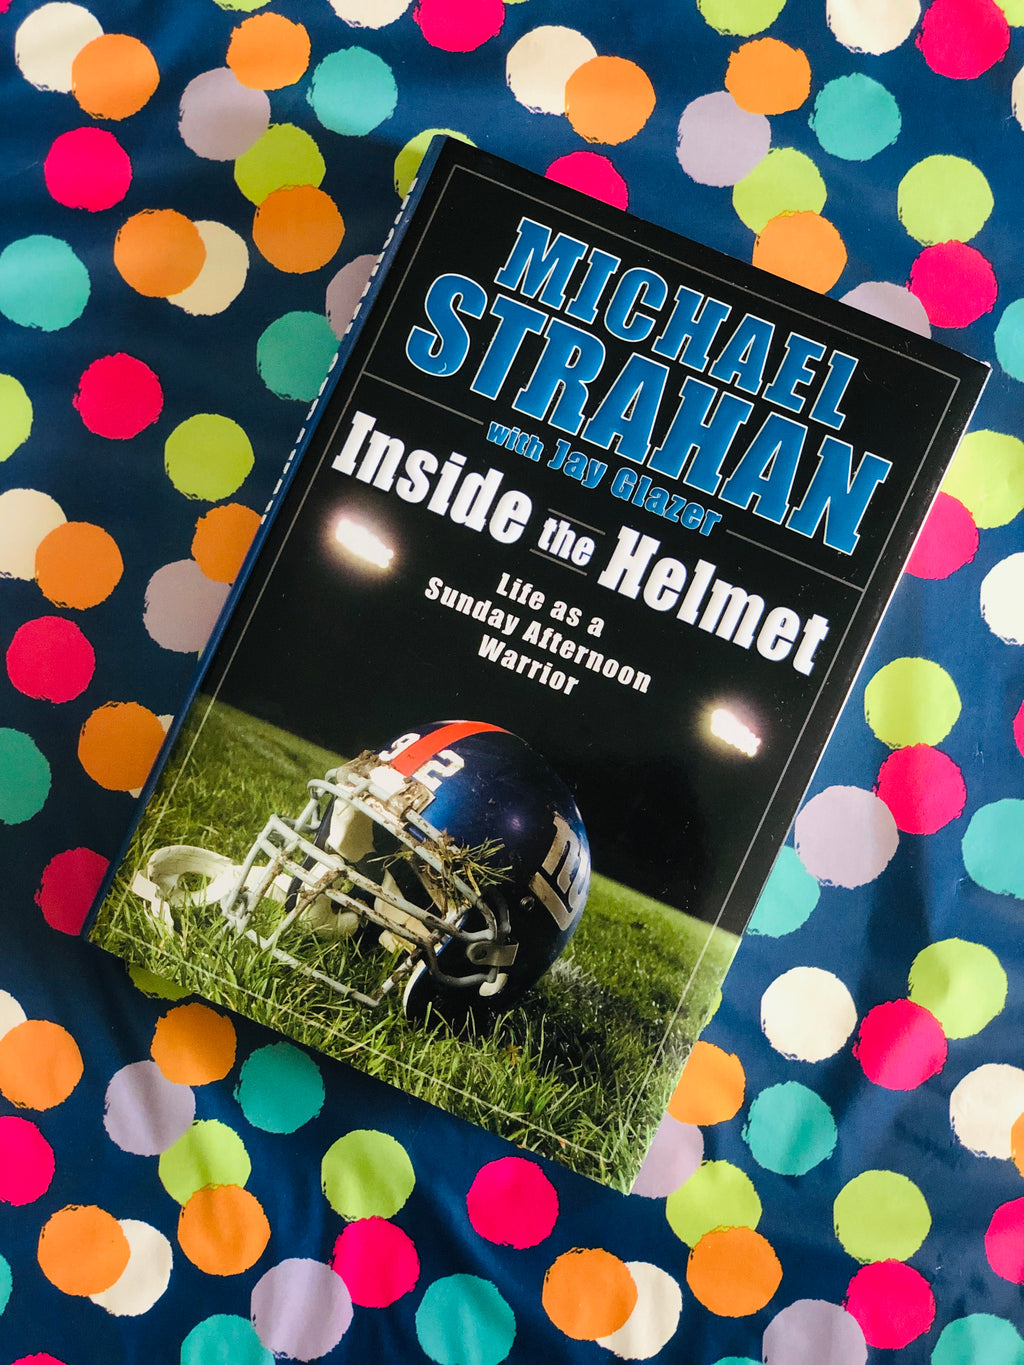 Inside The Helmet Life As A Sunday Afternoon Warrior by Michael Strahan with Jay Glazer